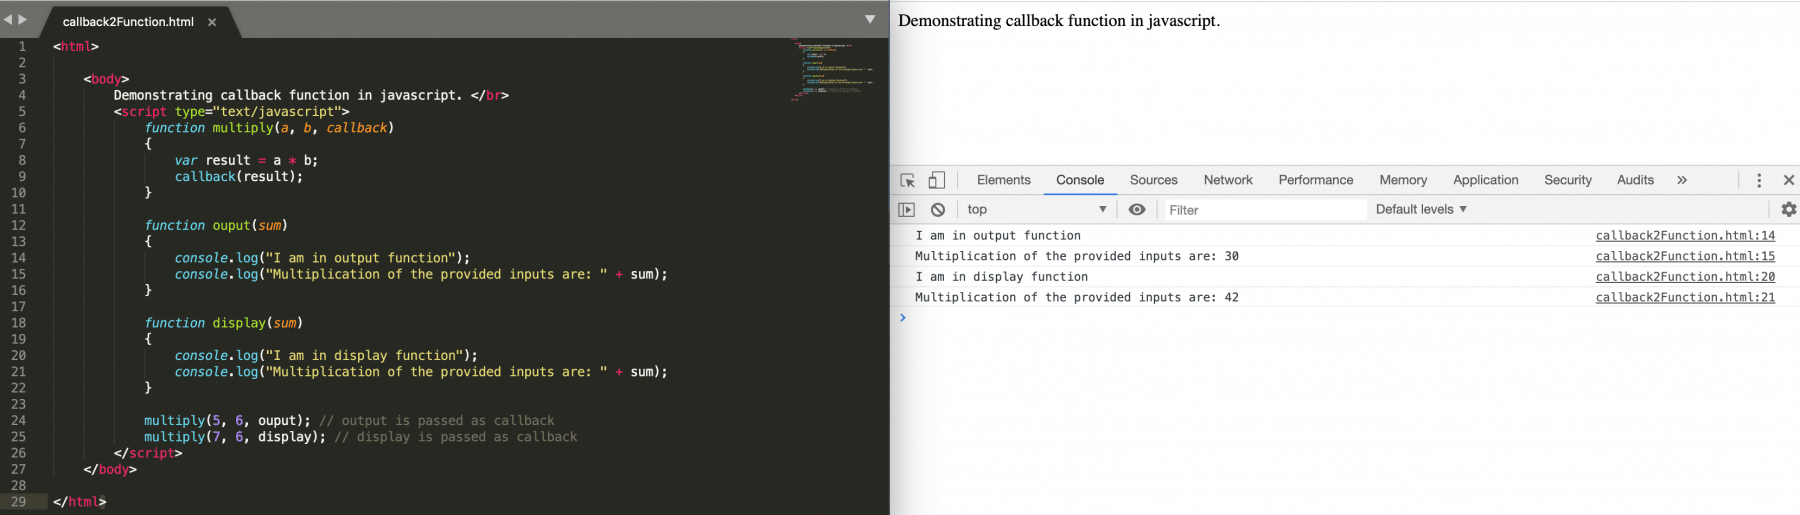 Understanding more about callback function in JavaScript